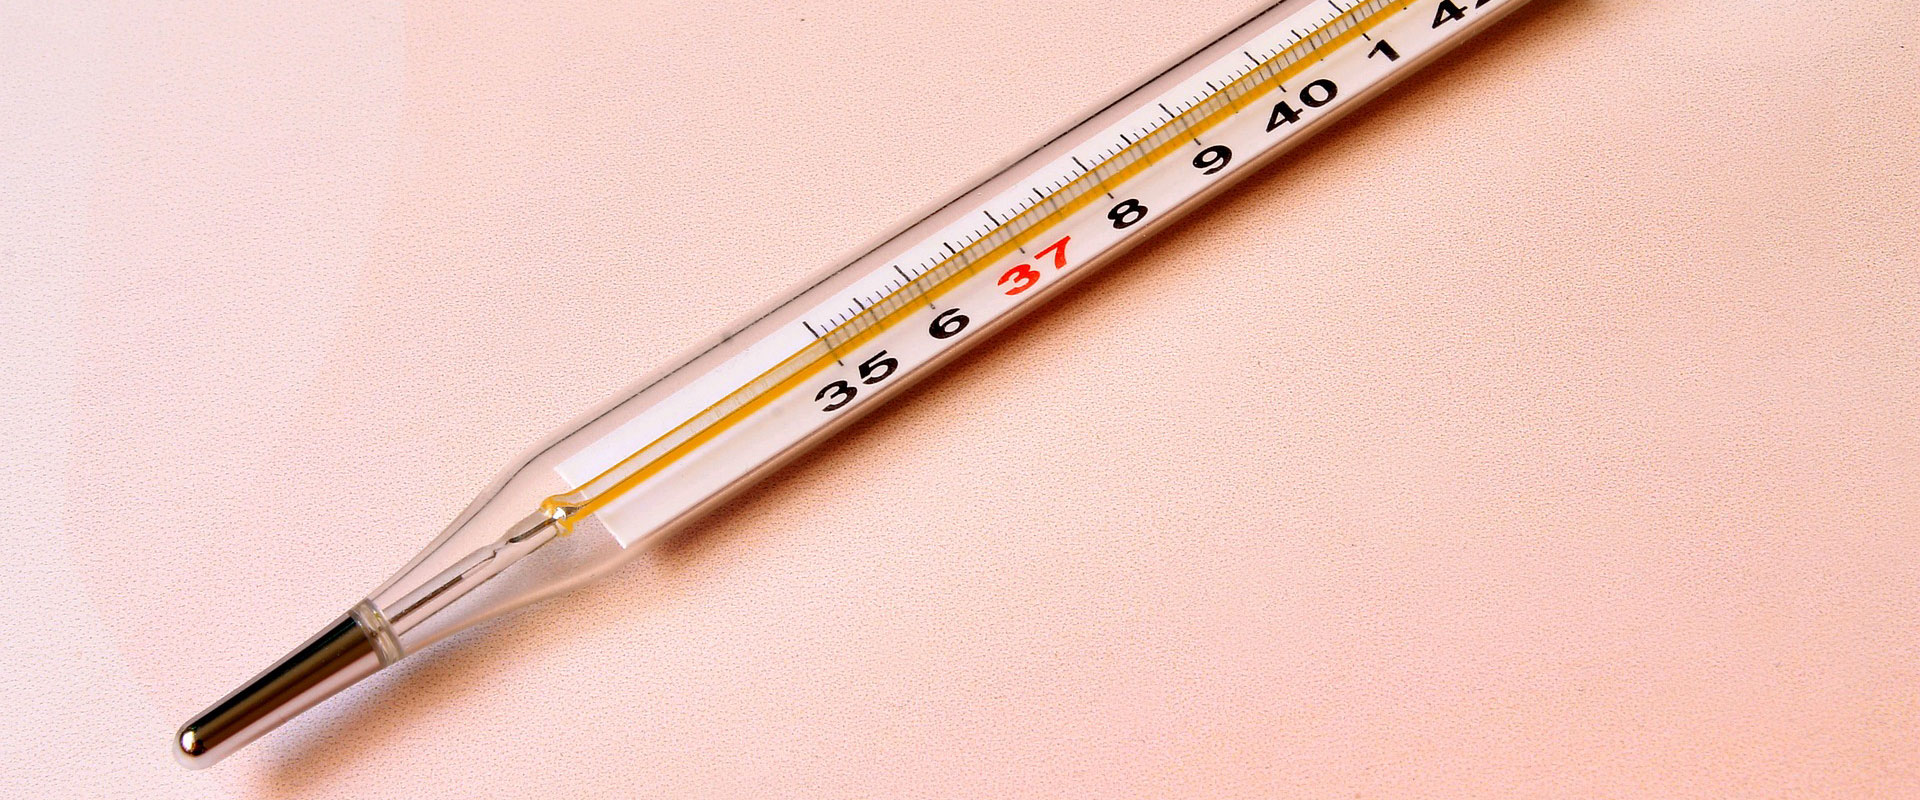 When to Use a Temperature Logger and How Does it Work?